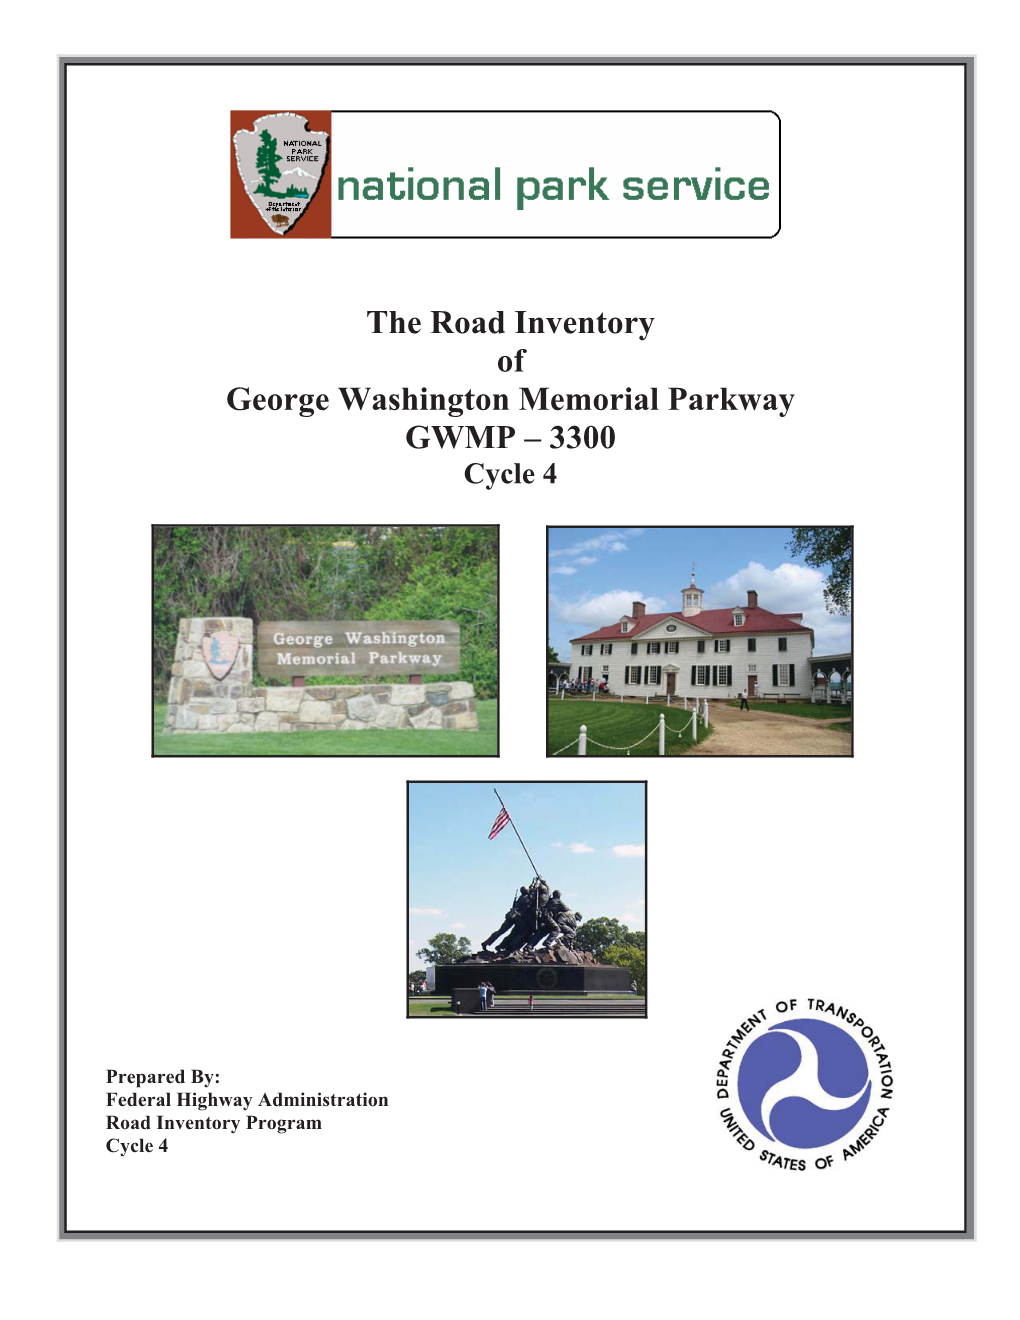 The Road Inventory of George Washington Memorial Parkway GWMP – 3300 Cycle 4